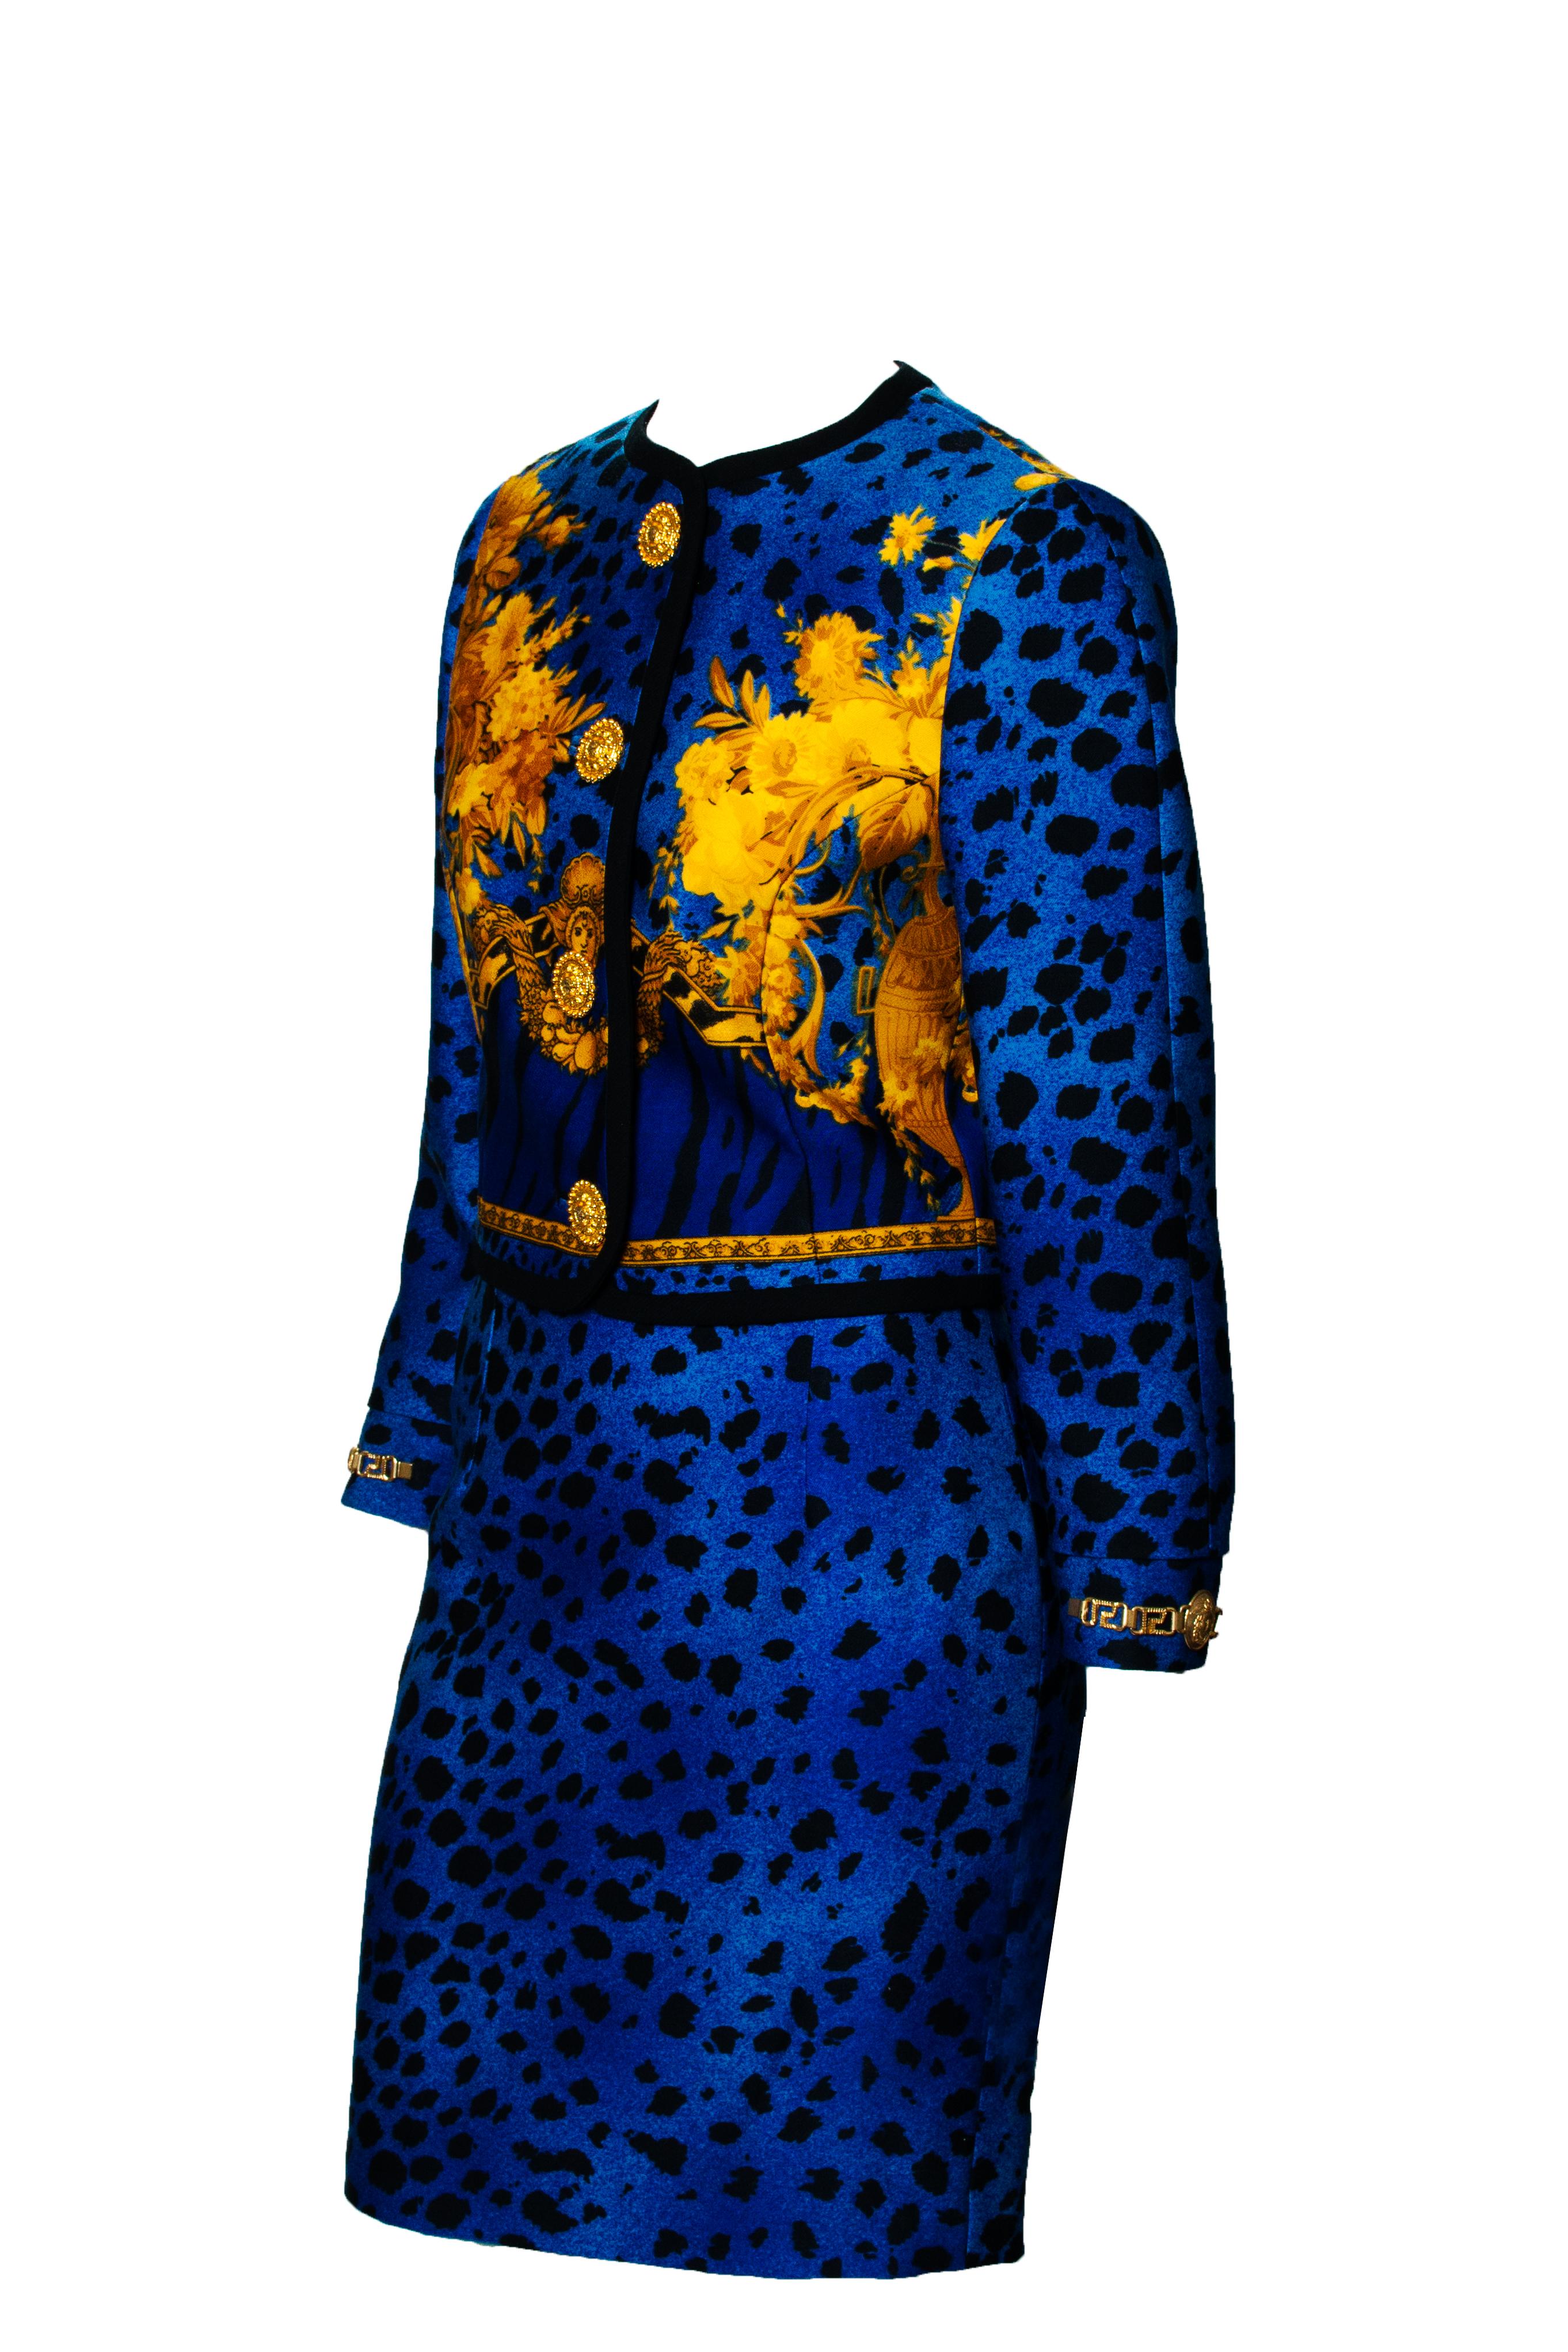 From 1992, this Gianni Versace skirt suit features a bright blue leopard print throughout. There is a blue tiger print section on the front and back next to a golden baroque pattern. Large gold-colored Medusa buttons are highlighted on the front of